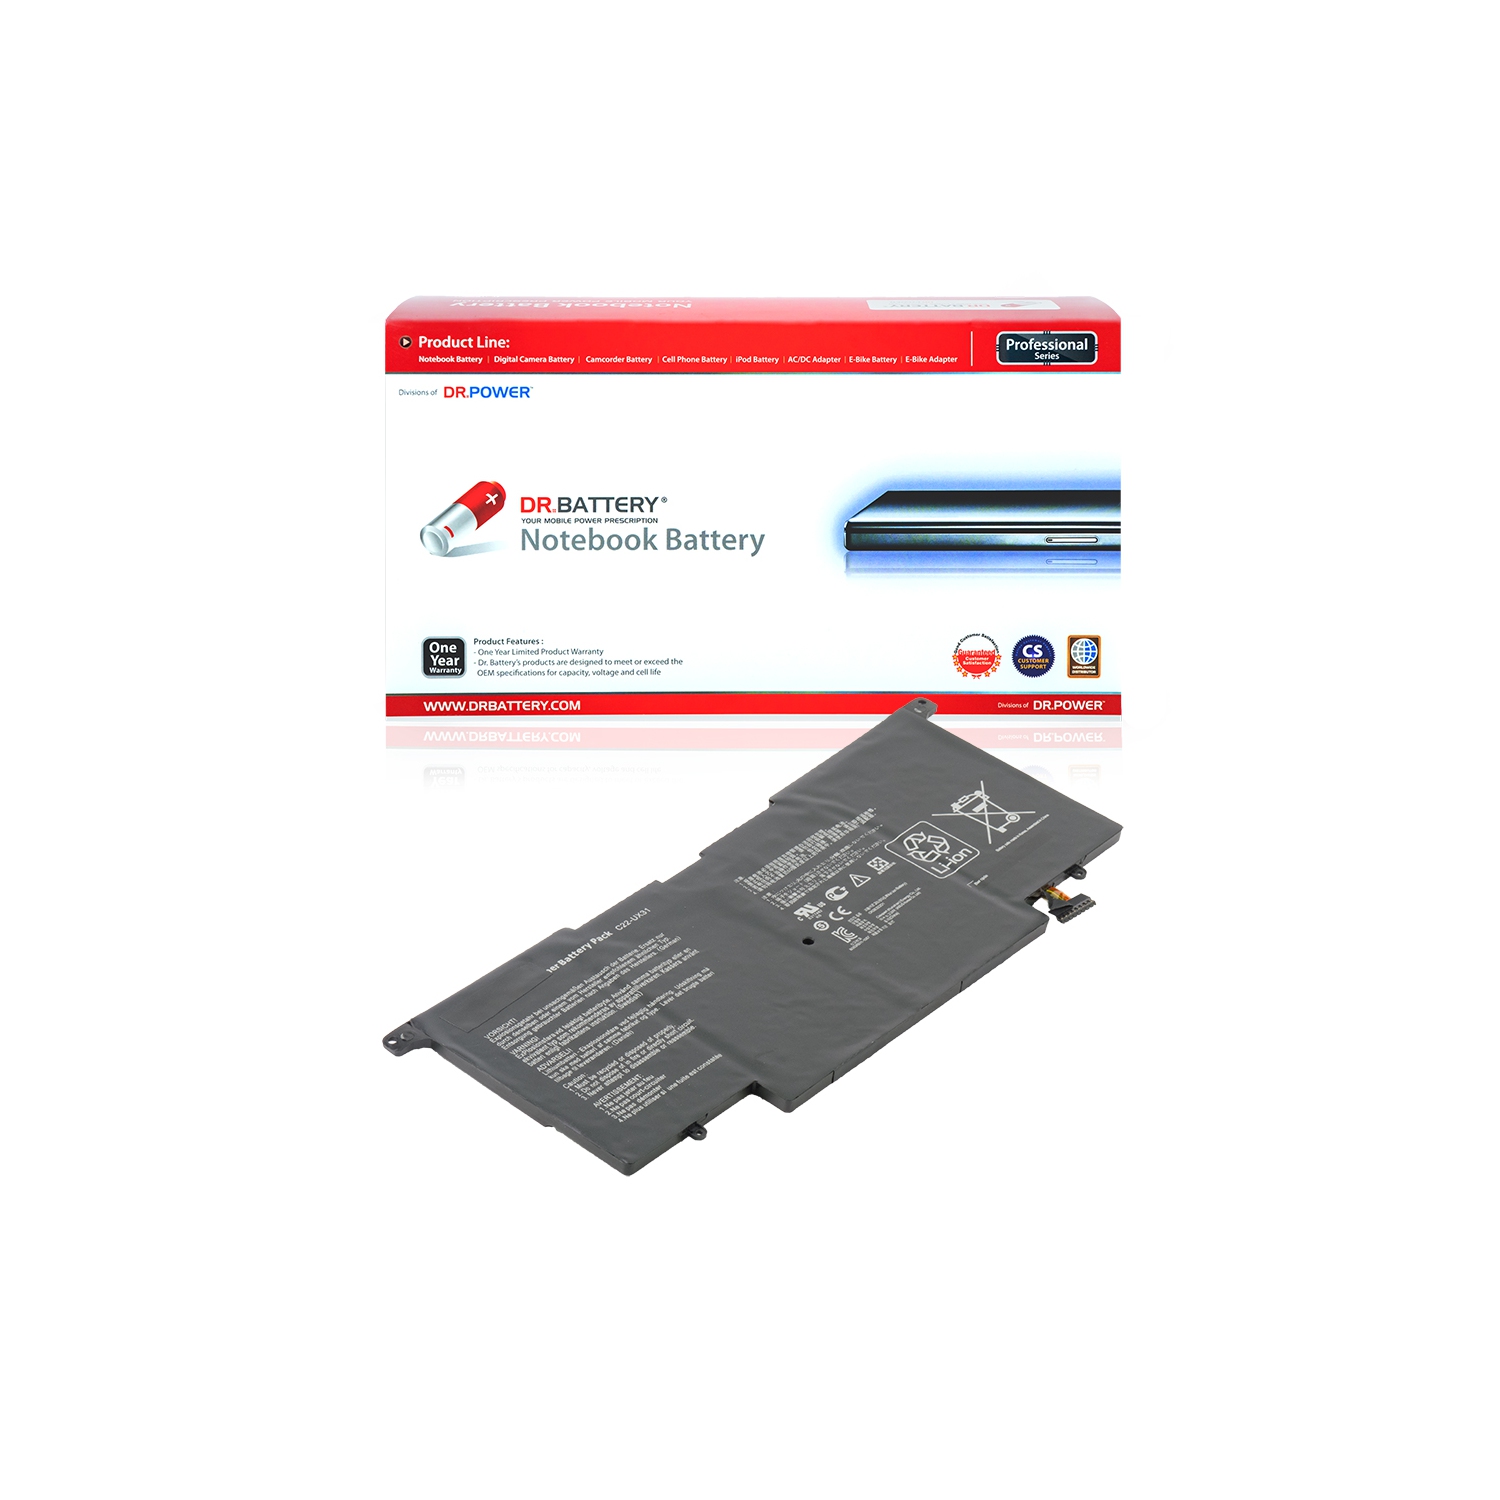 DR. BATTERY - Replacement for Asus ZenBook UX31A / UX31E / 21-UX31 / C22-UX31 / C23-UX31 [7.4V / 6840mAh / 50Wh] ***Free Shipping***